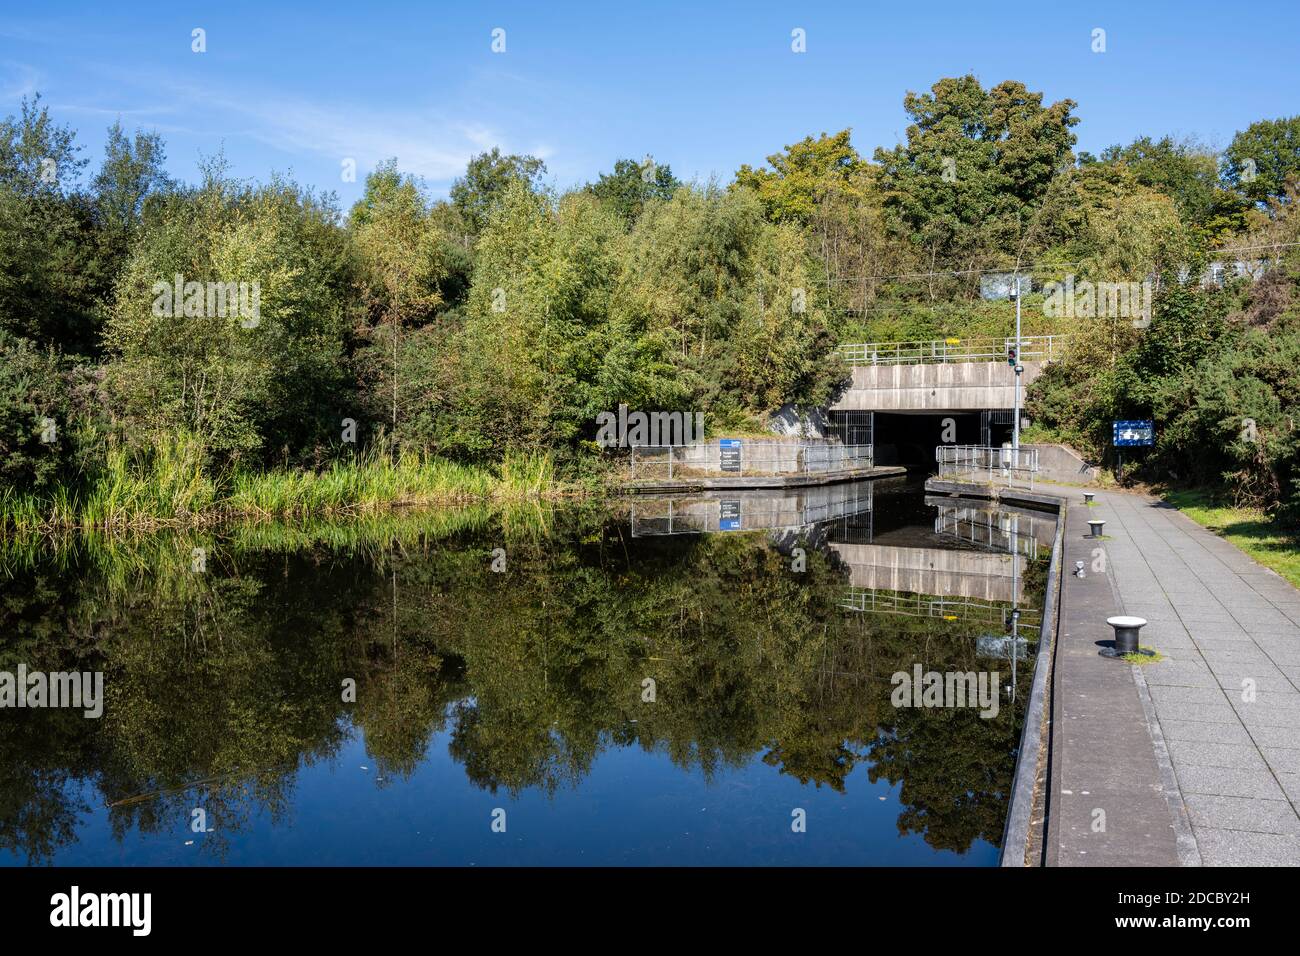 Canal basin and entrance to Roughcastle Tunnel and aqueduct leading to the Falkirk Wheel in Falkirk, Scotland, UK Stock Photo